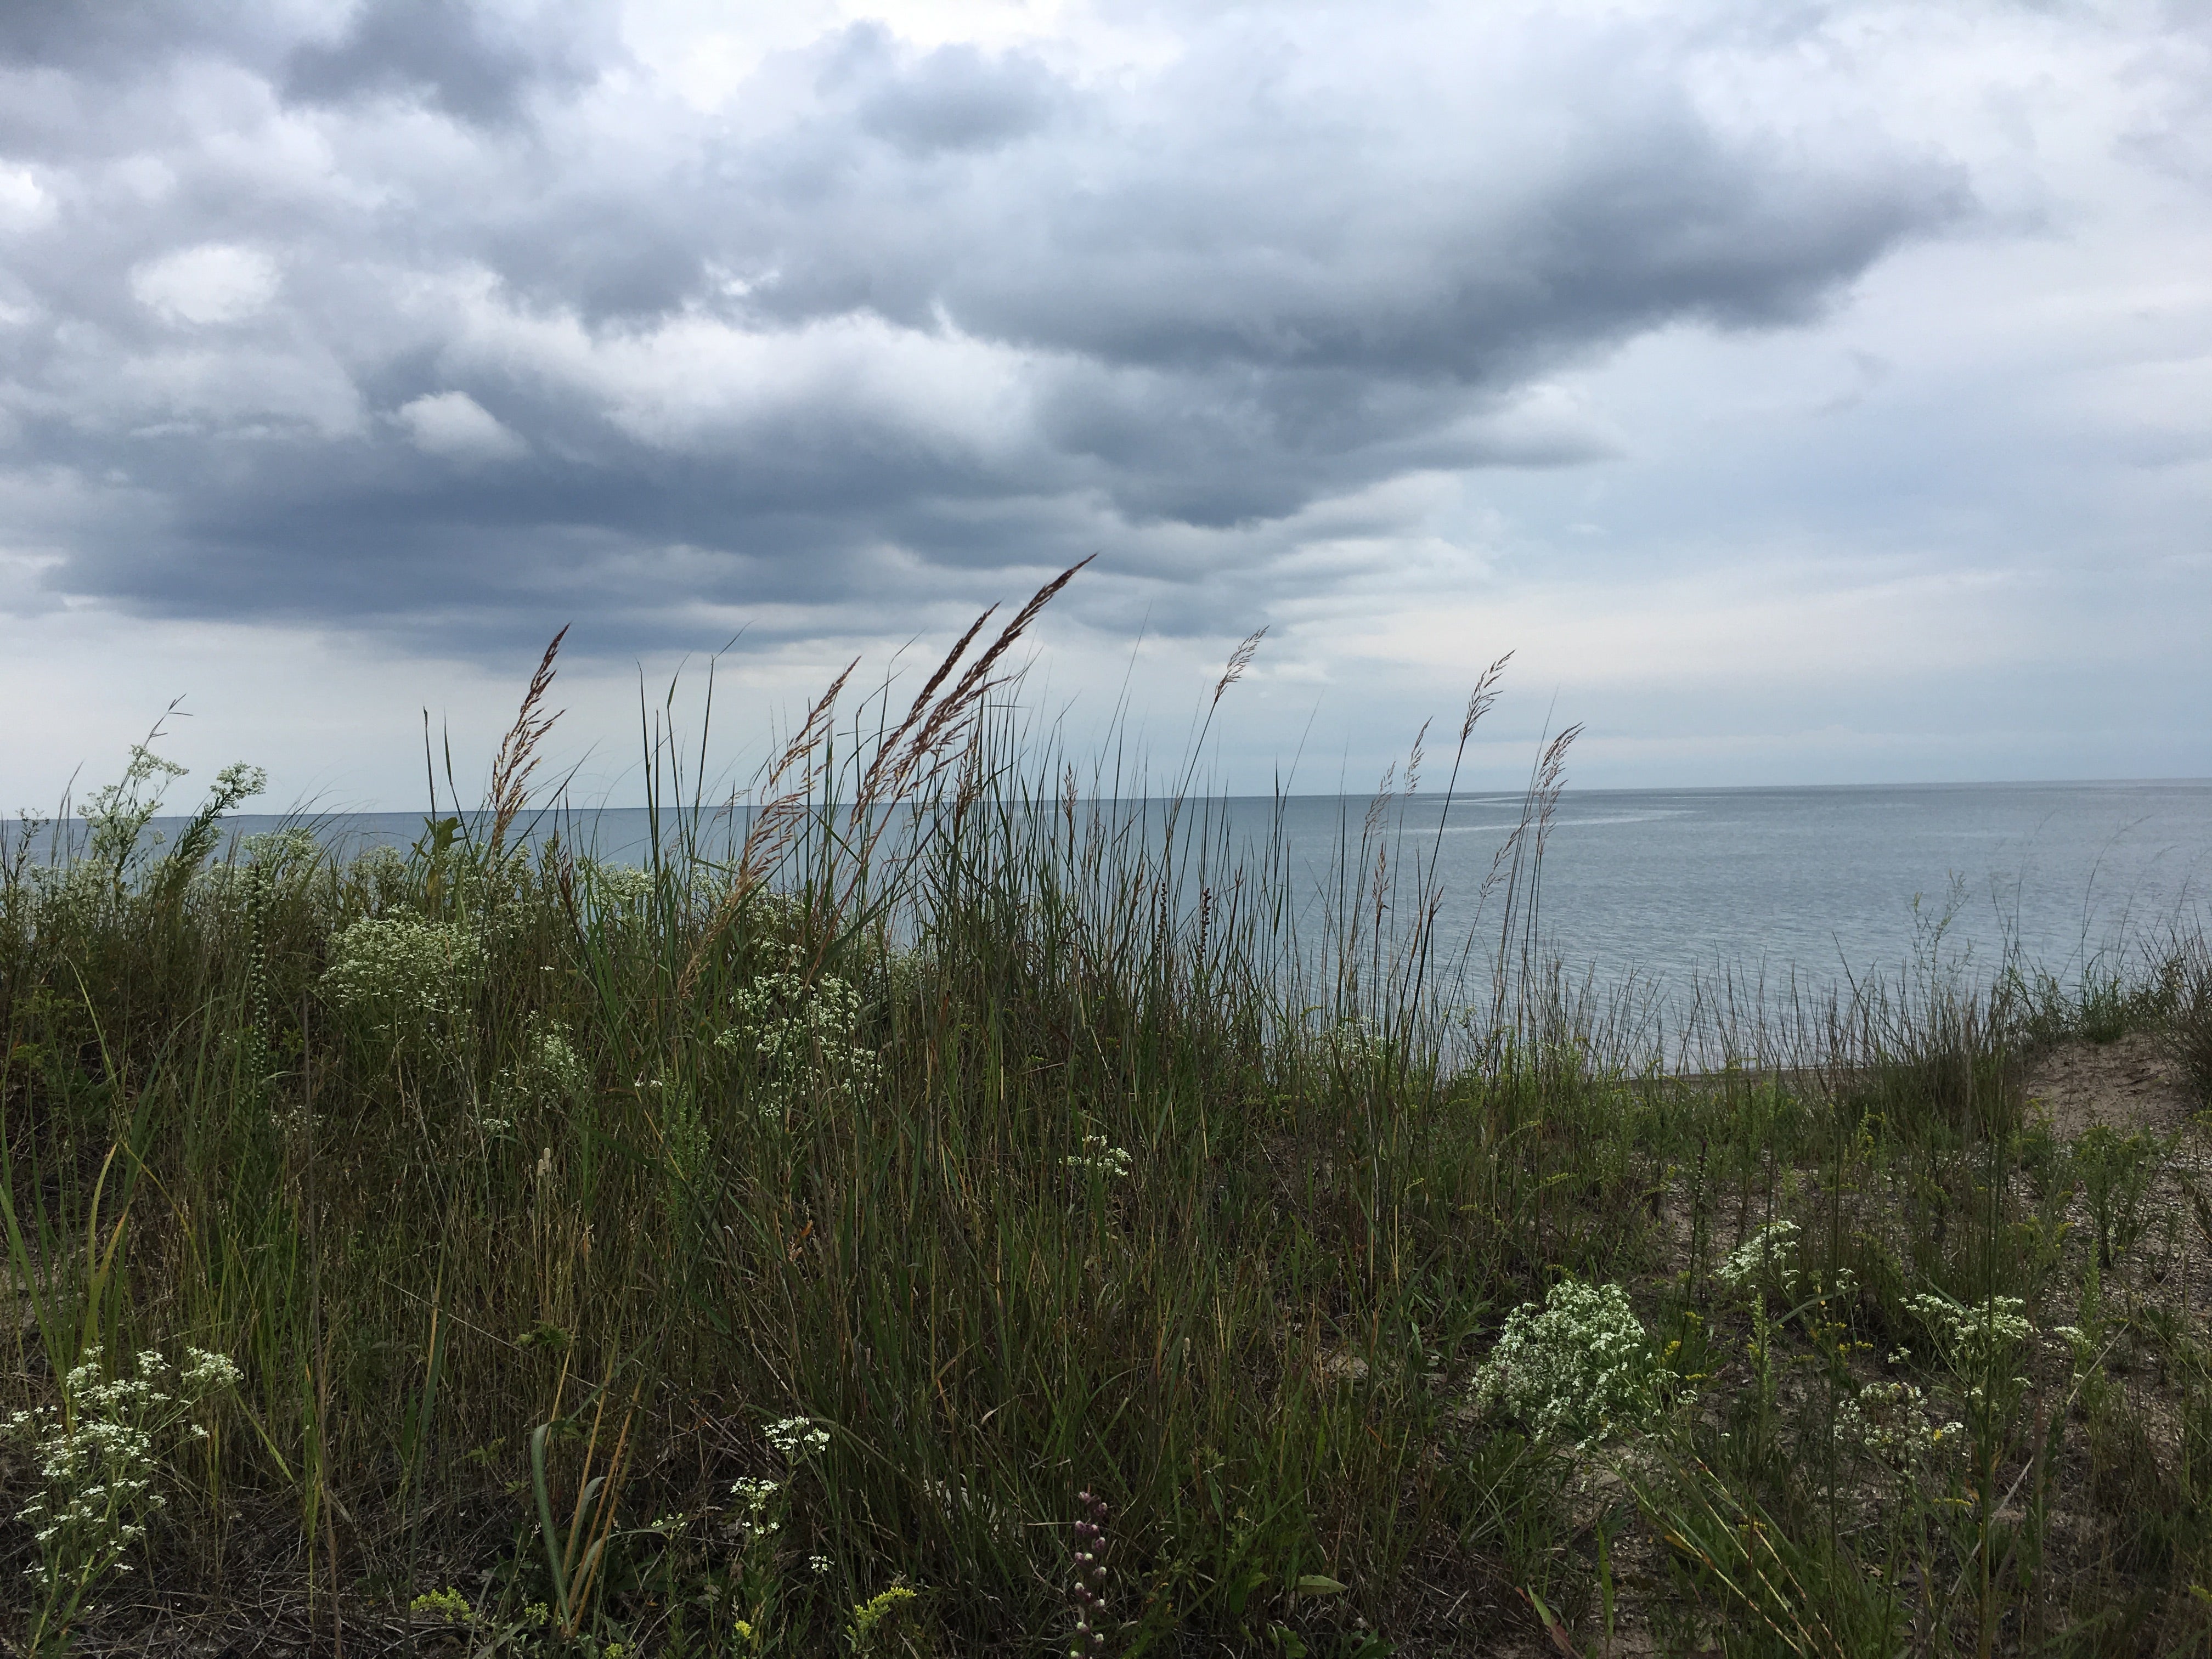 This is taken along the dunes that run alongside Lake Michigan at the campground.